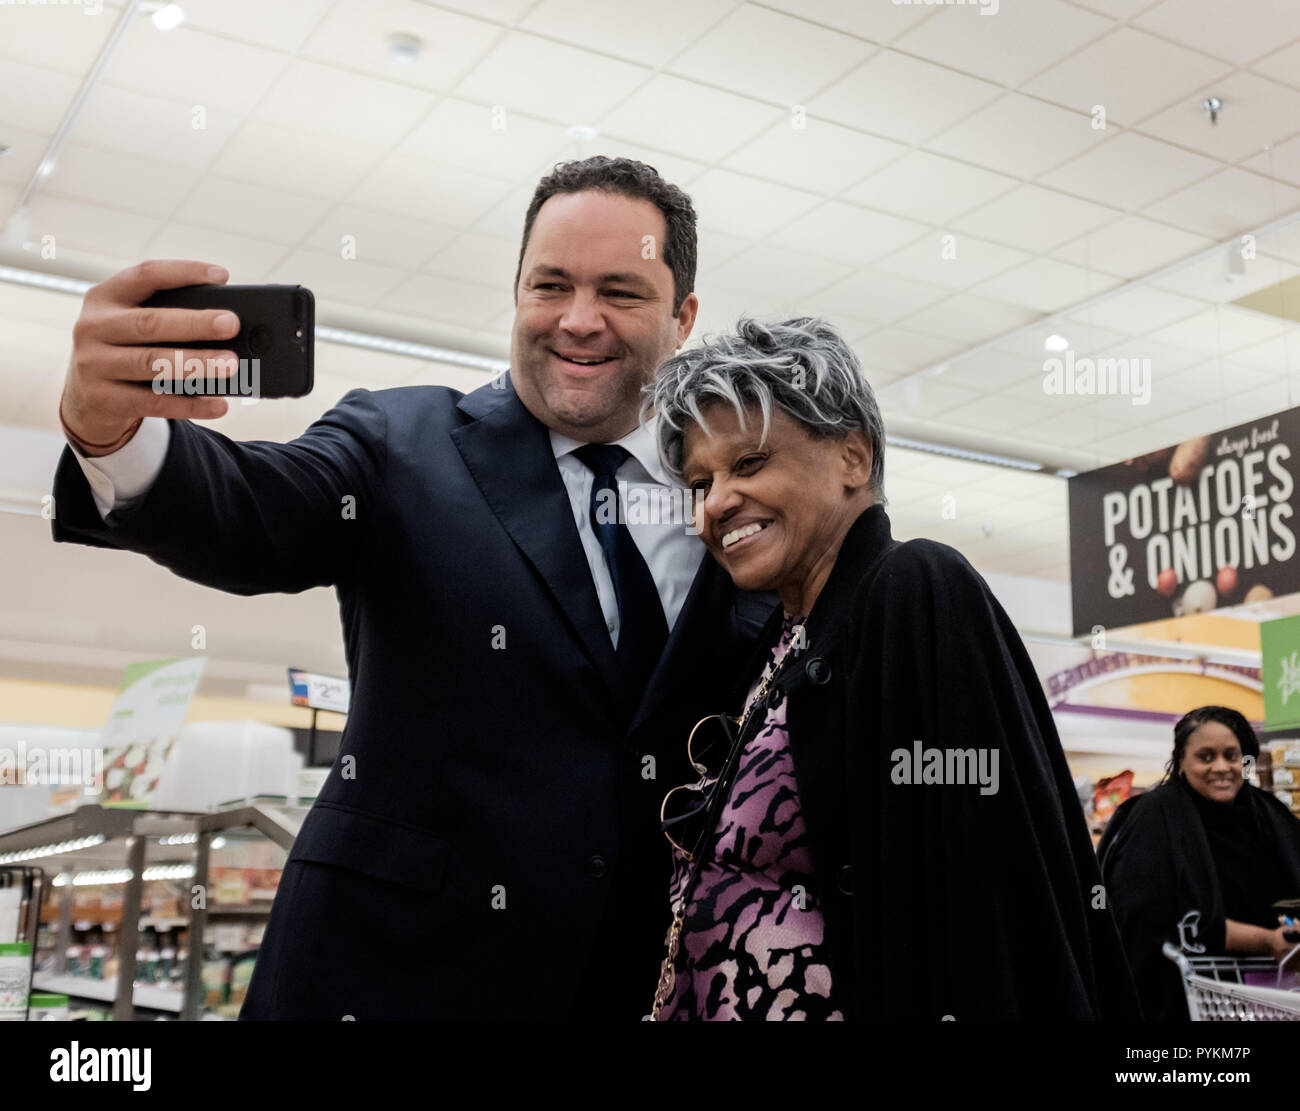 Largo, MD, USA. 26th Oct, 2018. Maryland Democratic Gubernatorial Candidate BENJAMIN JEALOUS takes a selfie with a potential voter at an event in Largo, MD on October 26, 2018. Credit: Michael A. McCoy/ZUMA Wire/Alamy Live News Stock Photo